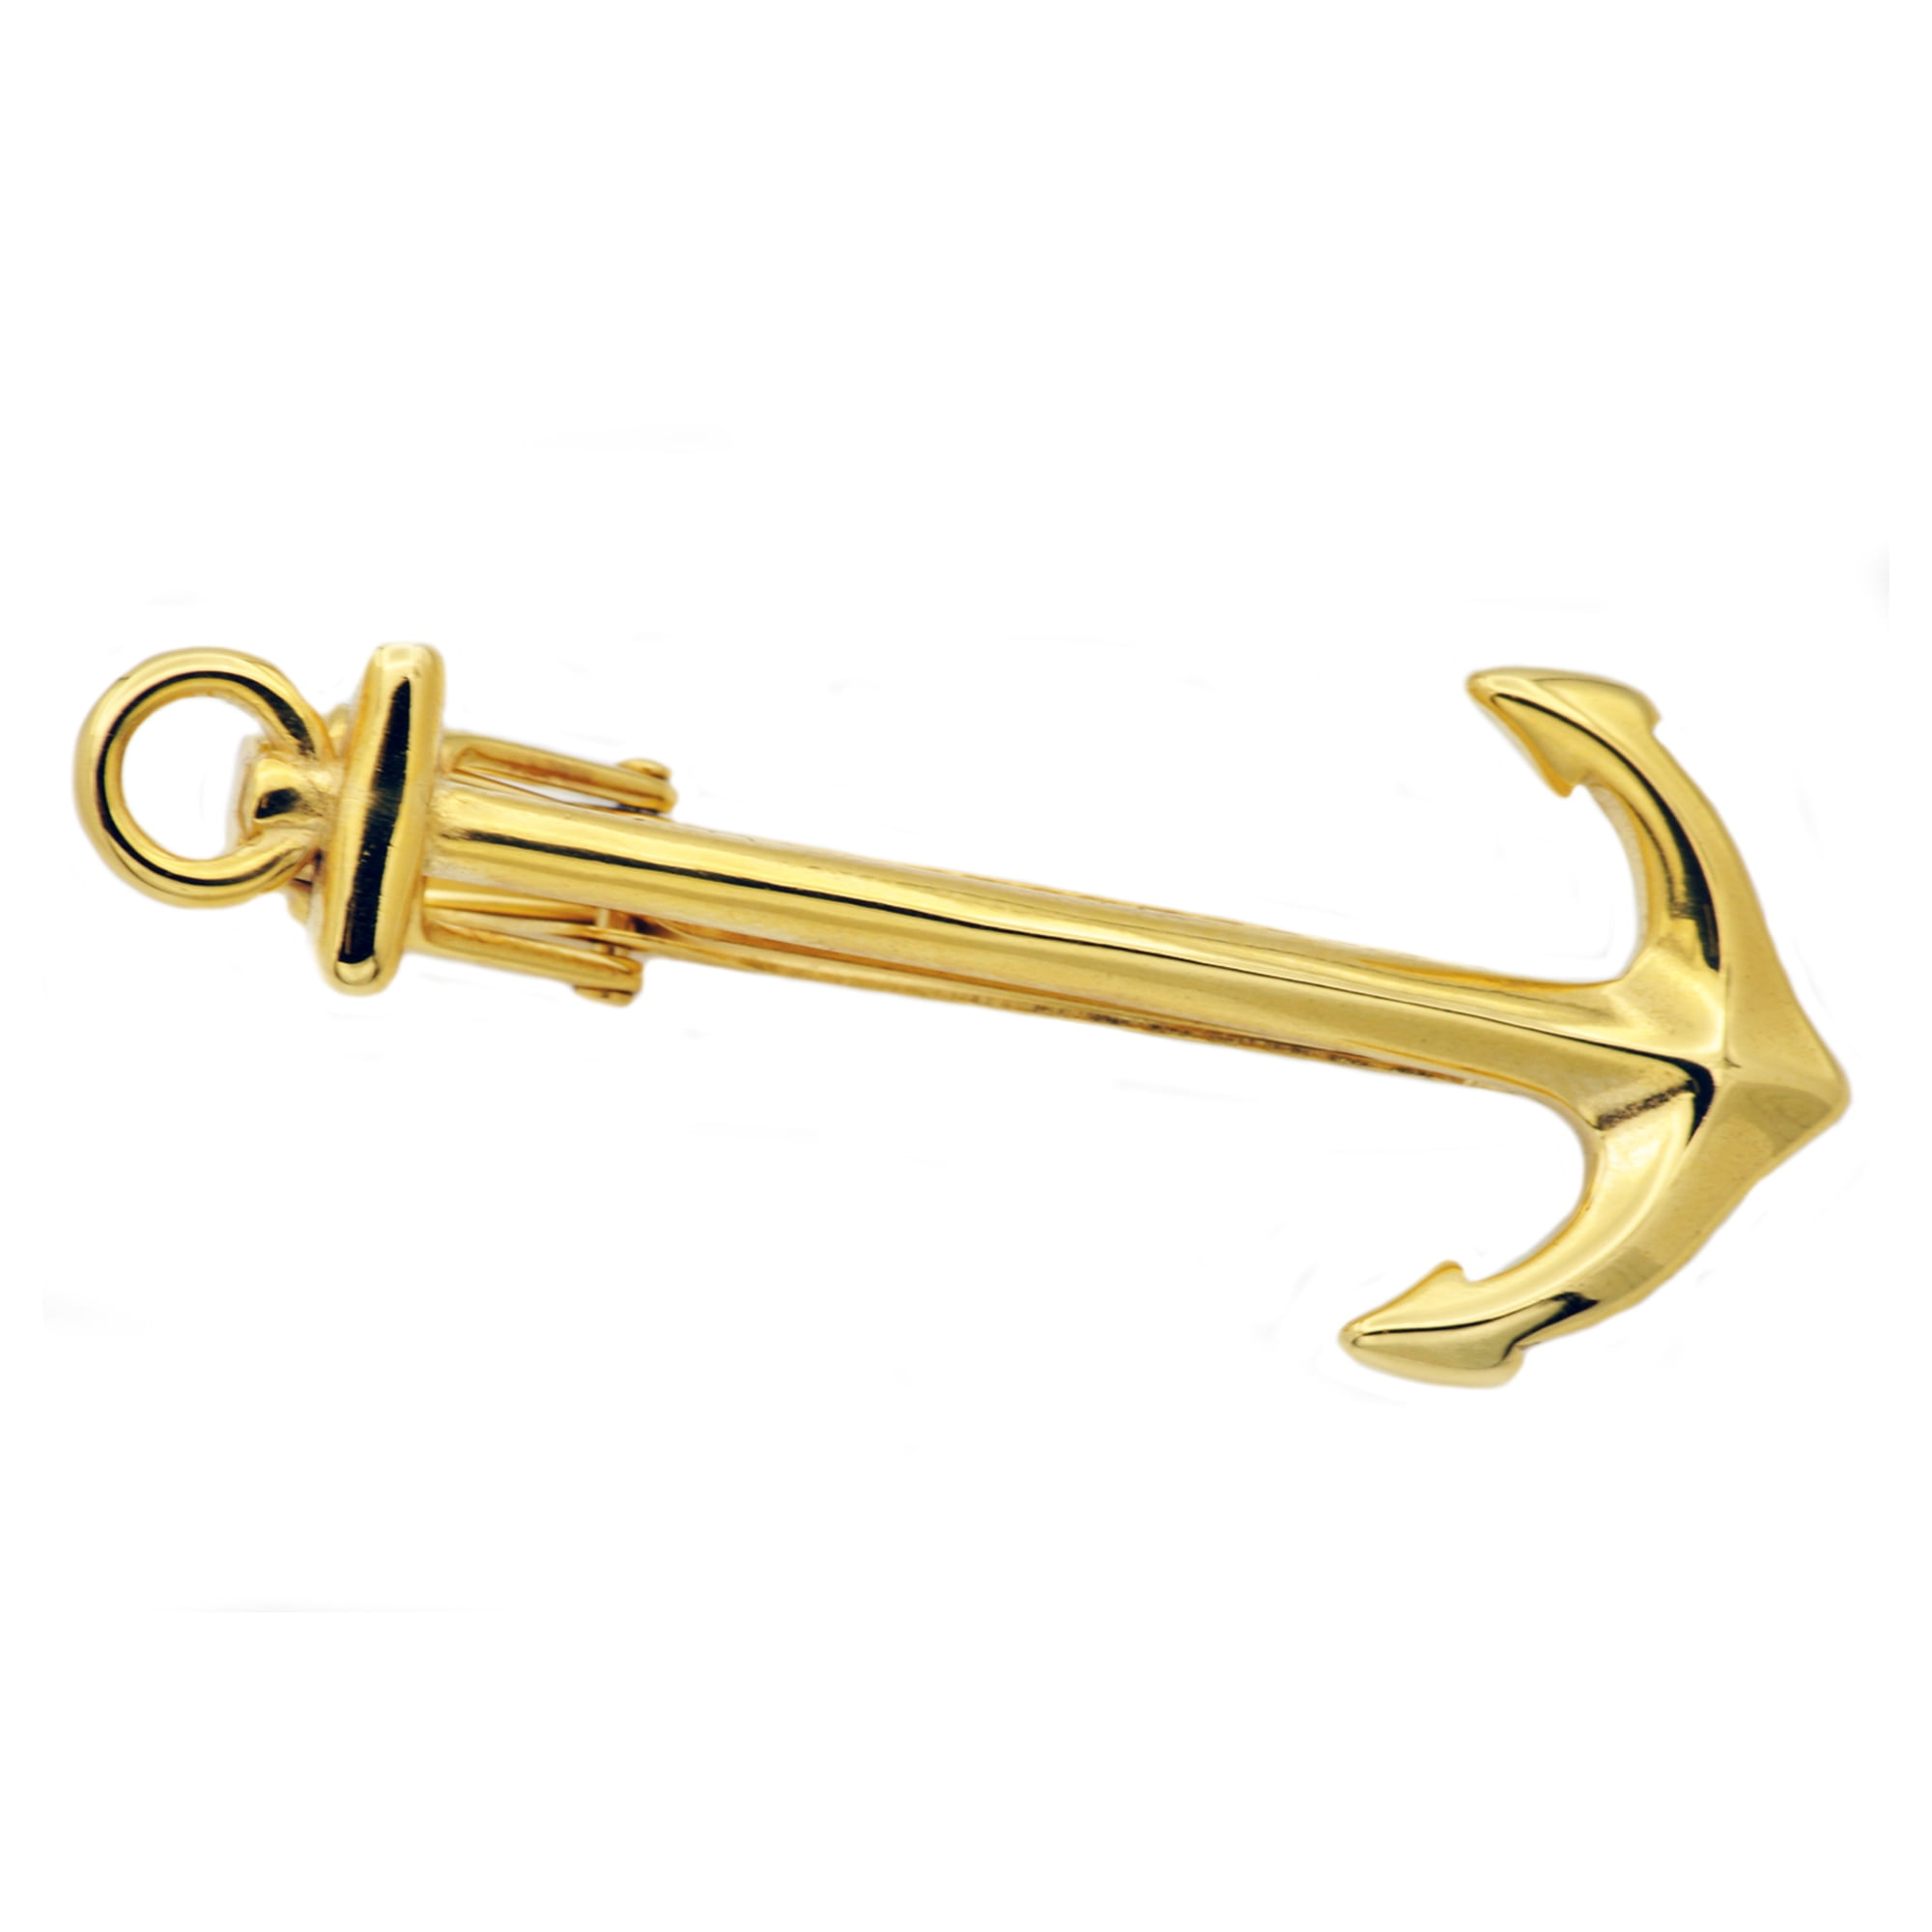 Stainless Steel Gold Chain Tie Clip